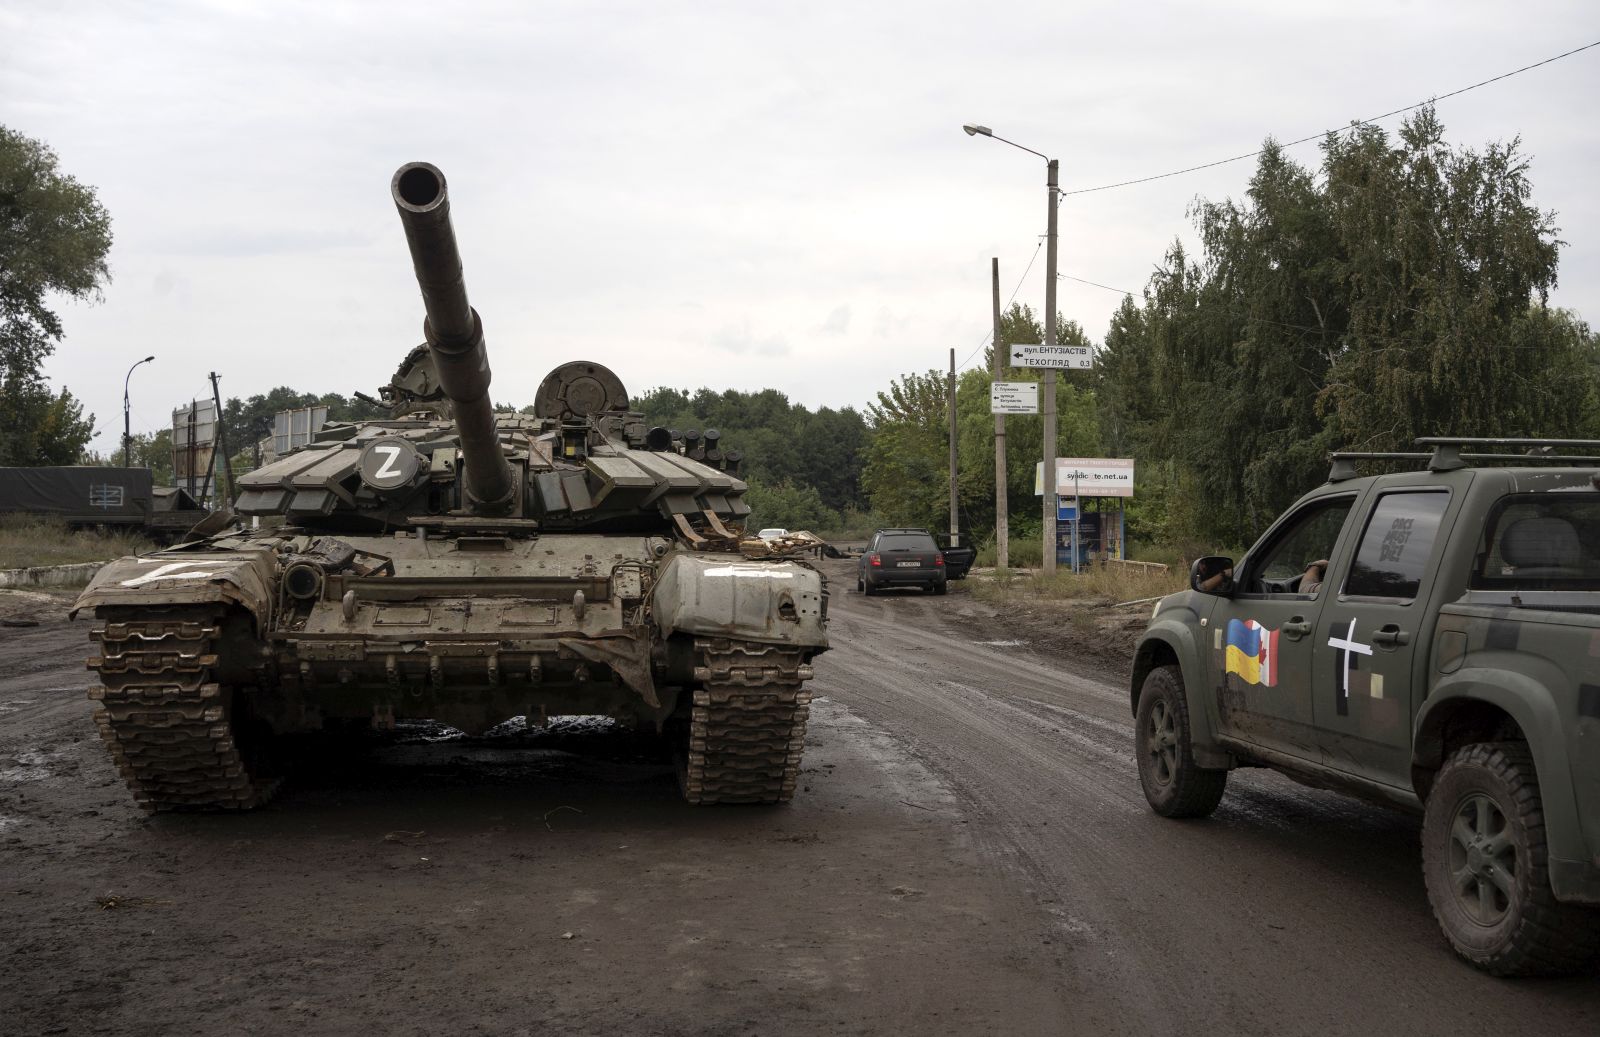 epa10186105 A Ukrainian military vehicle (R) passes by a destroyed Russian tank (L) in the reclaimed city of Izyum, Ukraine, 15 September 2022. The Ukrainian army pushed Russian troops from occupied territory in the northeast of the country in a counterattack. Kharkiv and surrounding areas have been the target of heavy shelling since February 2022, when Russian troops entered Ukraine starting a conflict that has provoked destruction and a humanitarian crisis.  EPA/ANASTASIA VLASOVA